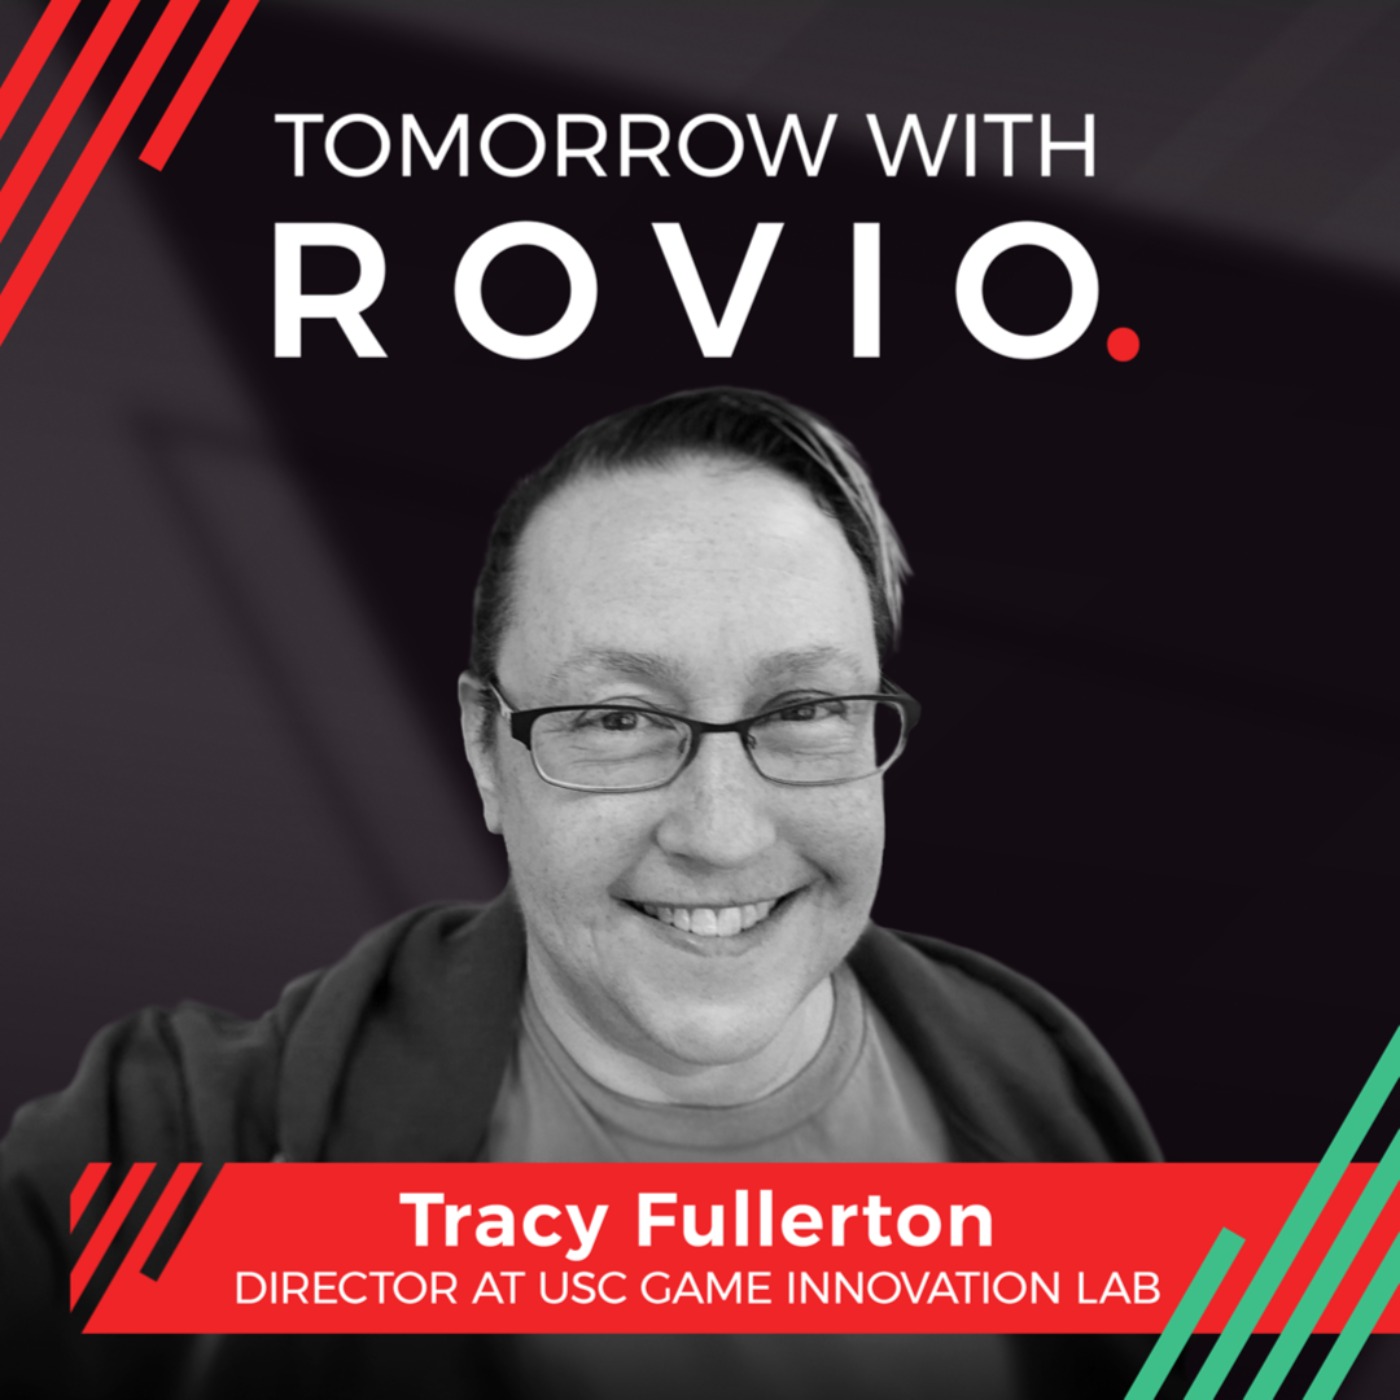 Tracy Fullerton - Director at USC Game Innovation Lab